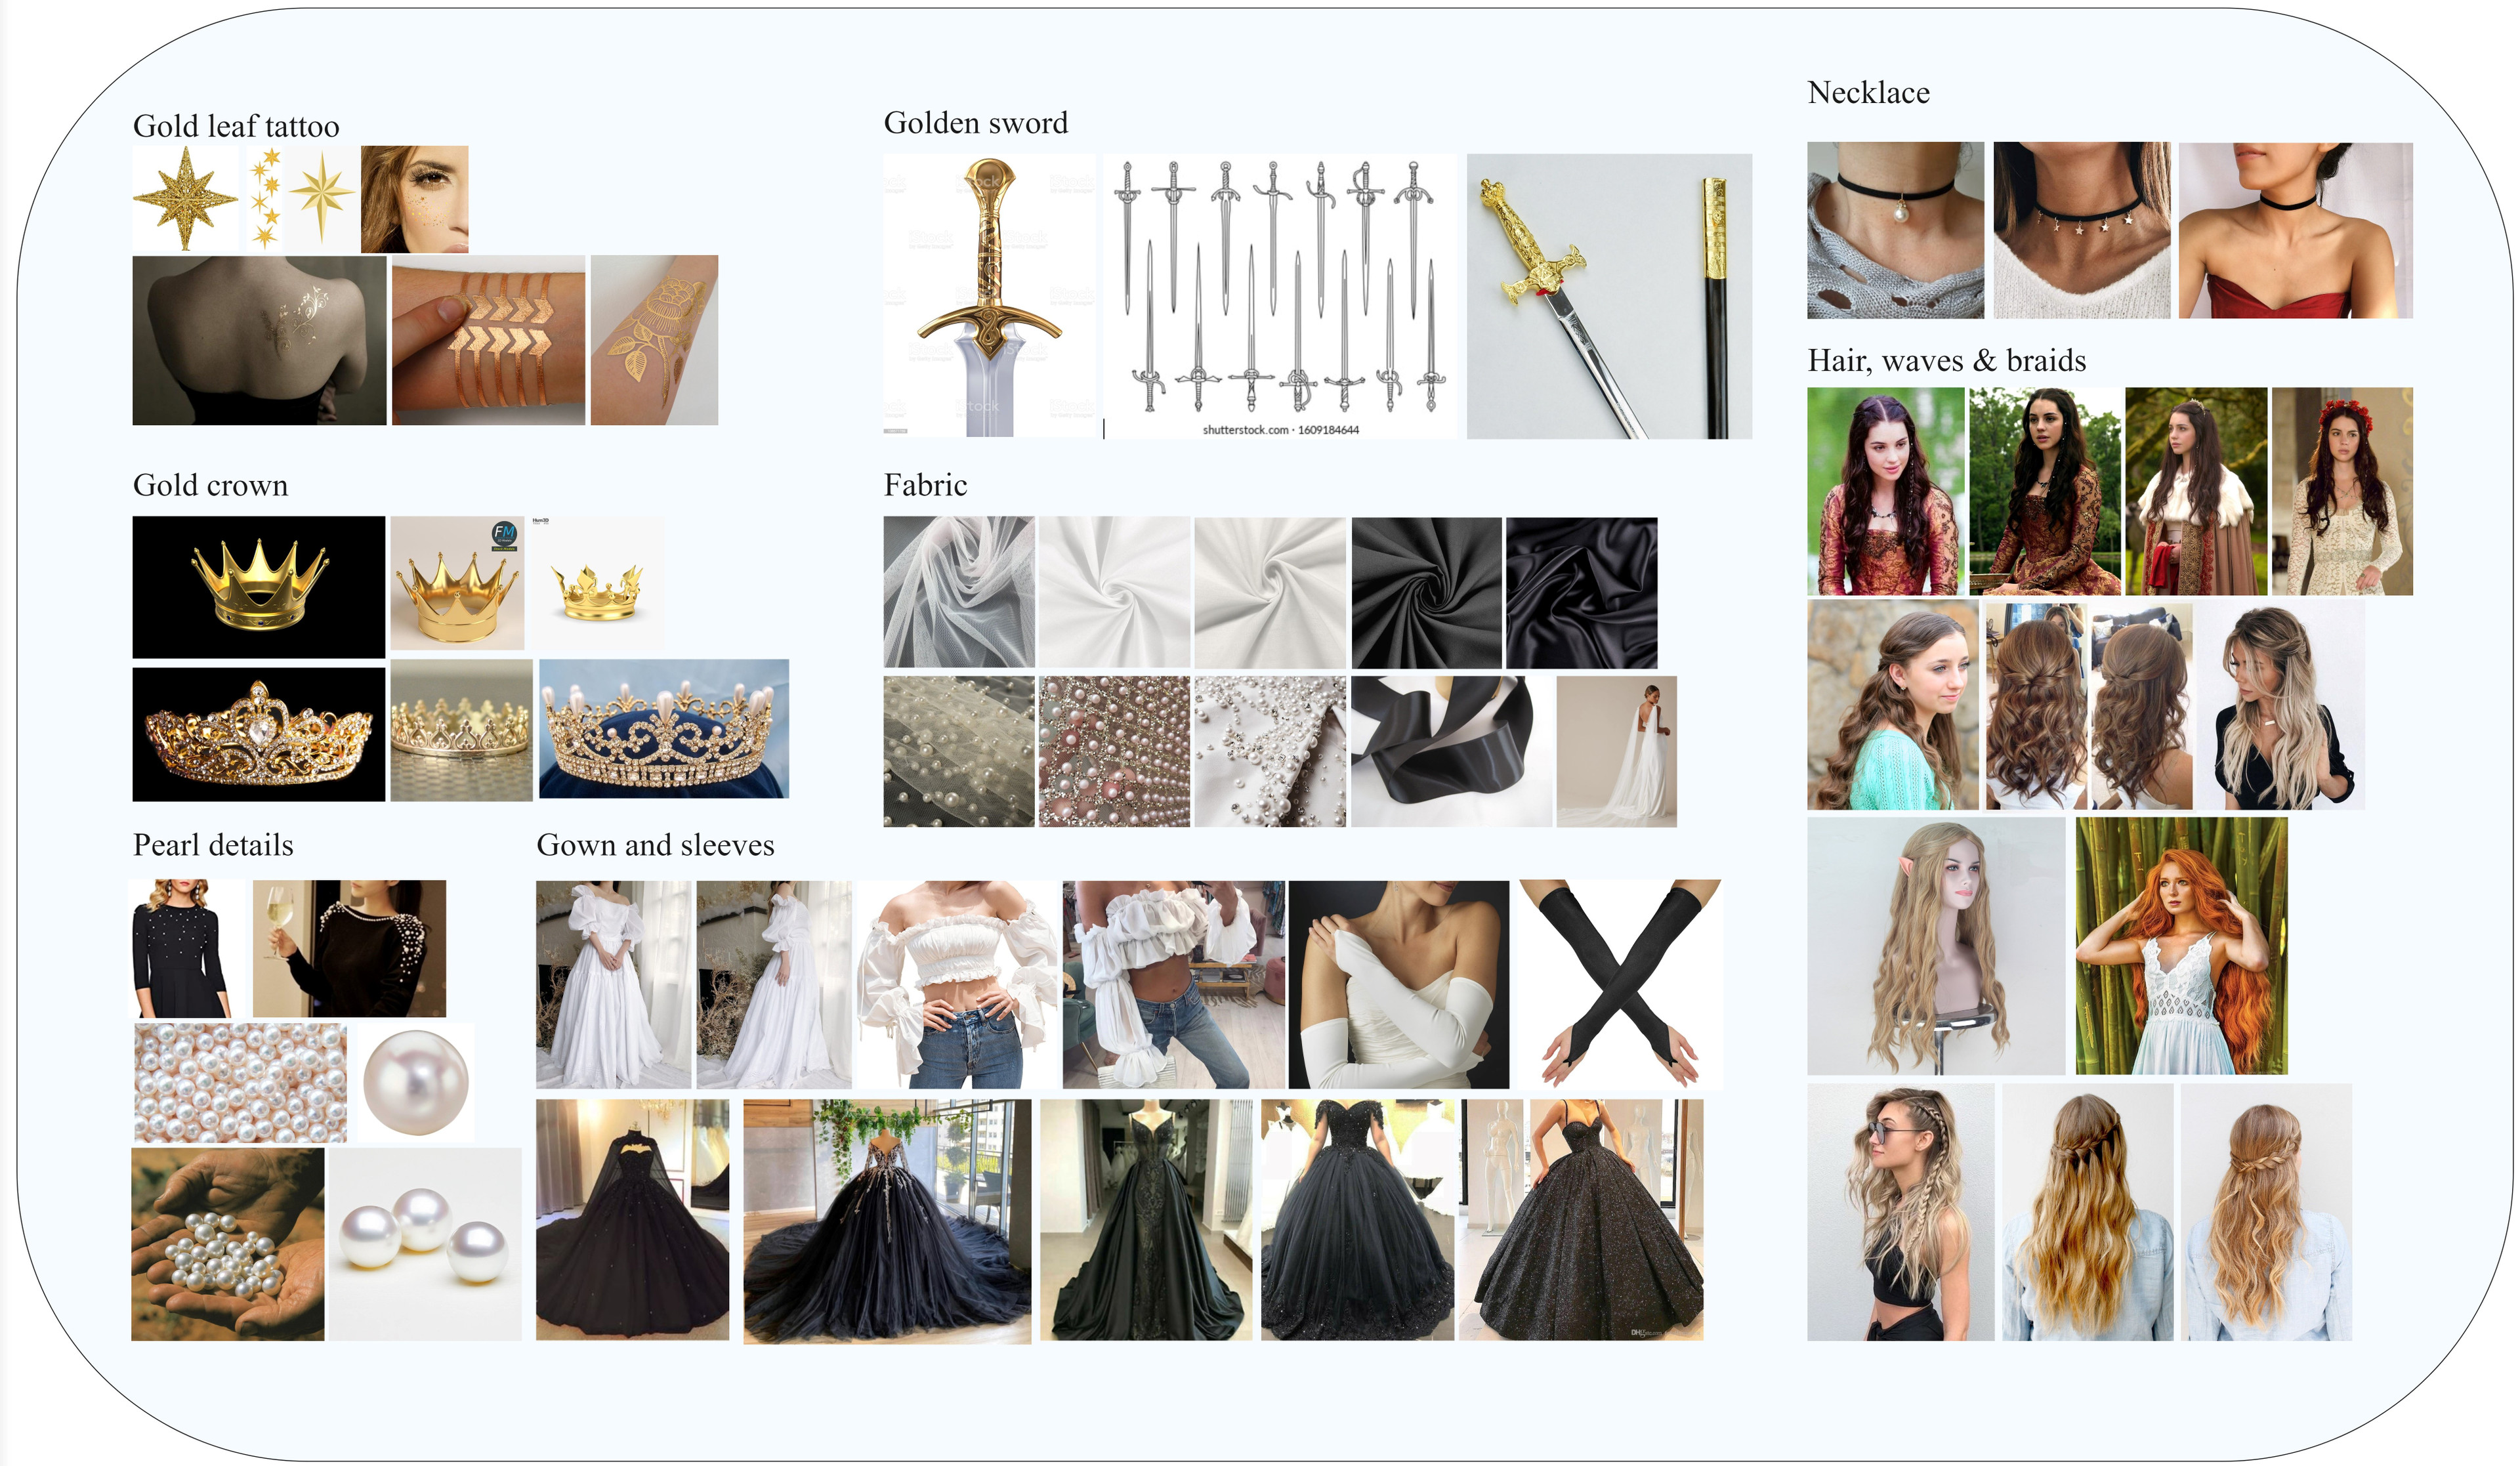 Extensive moodboard to explore types of dress silhouettes, hairstyles, etc.